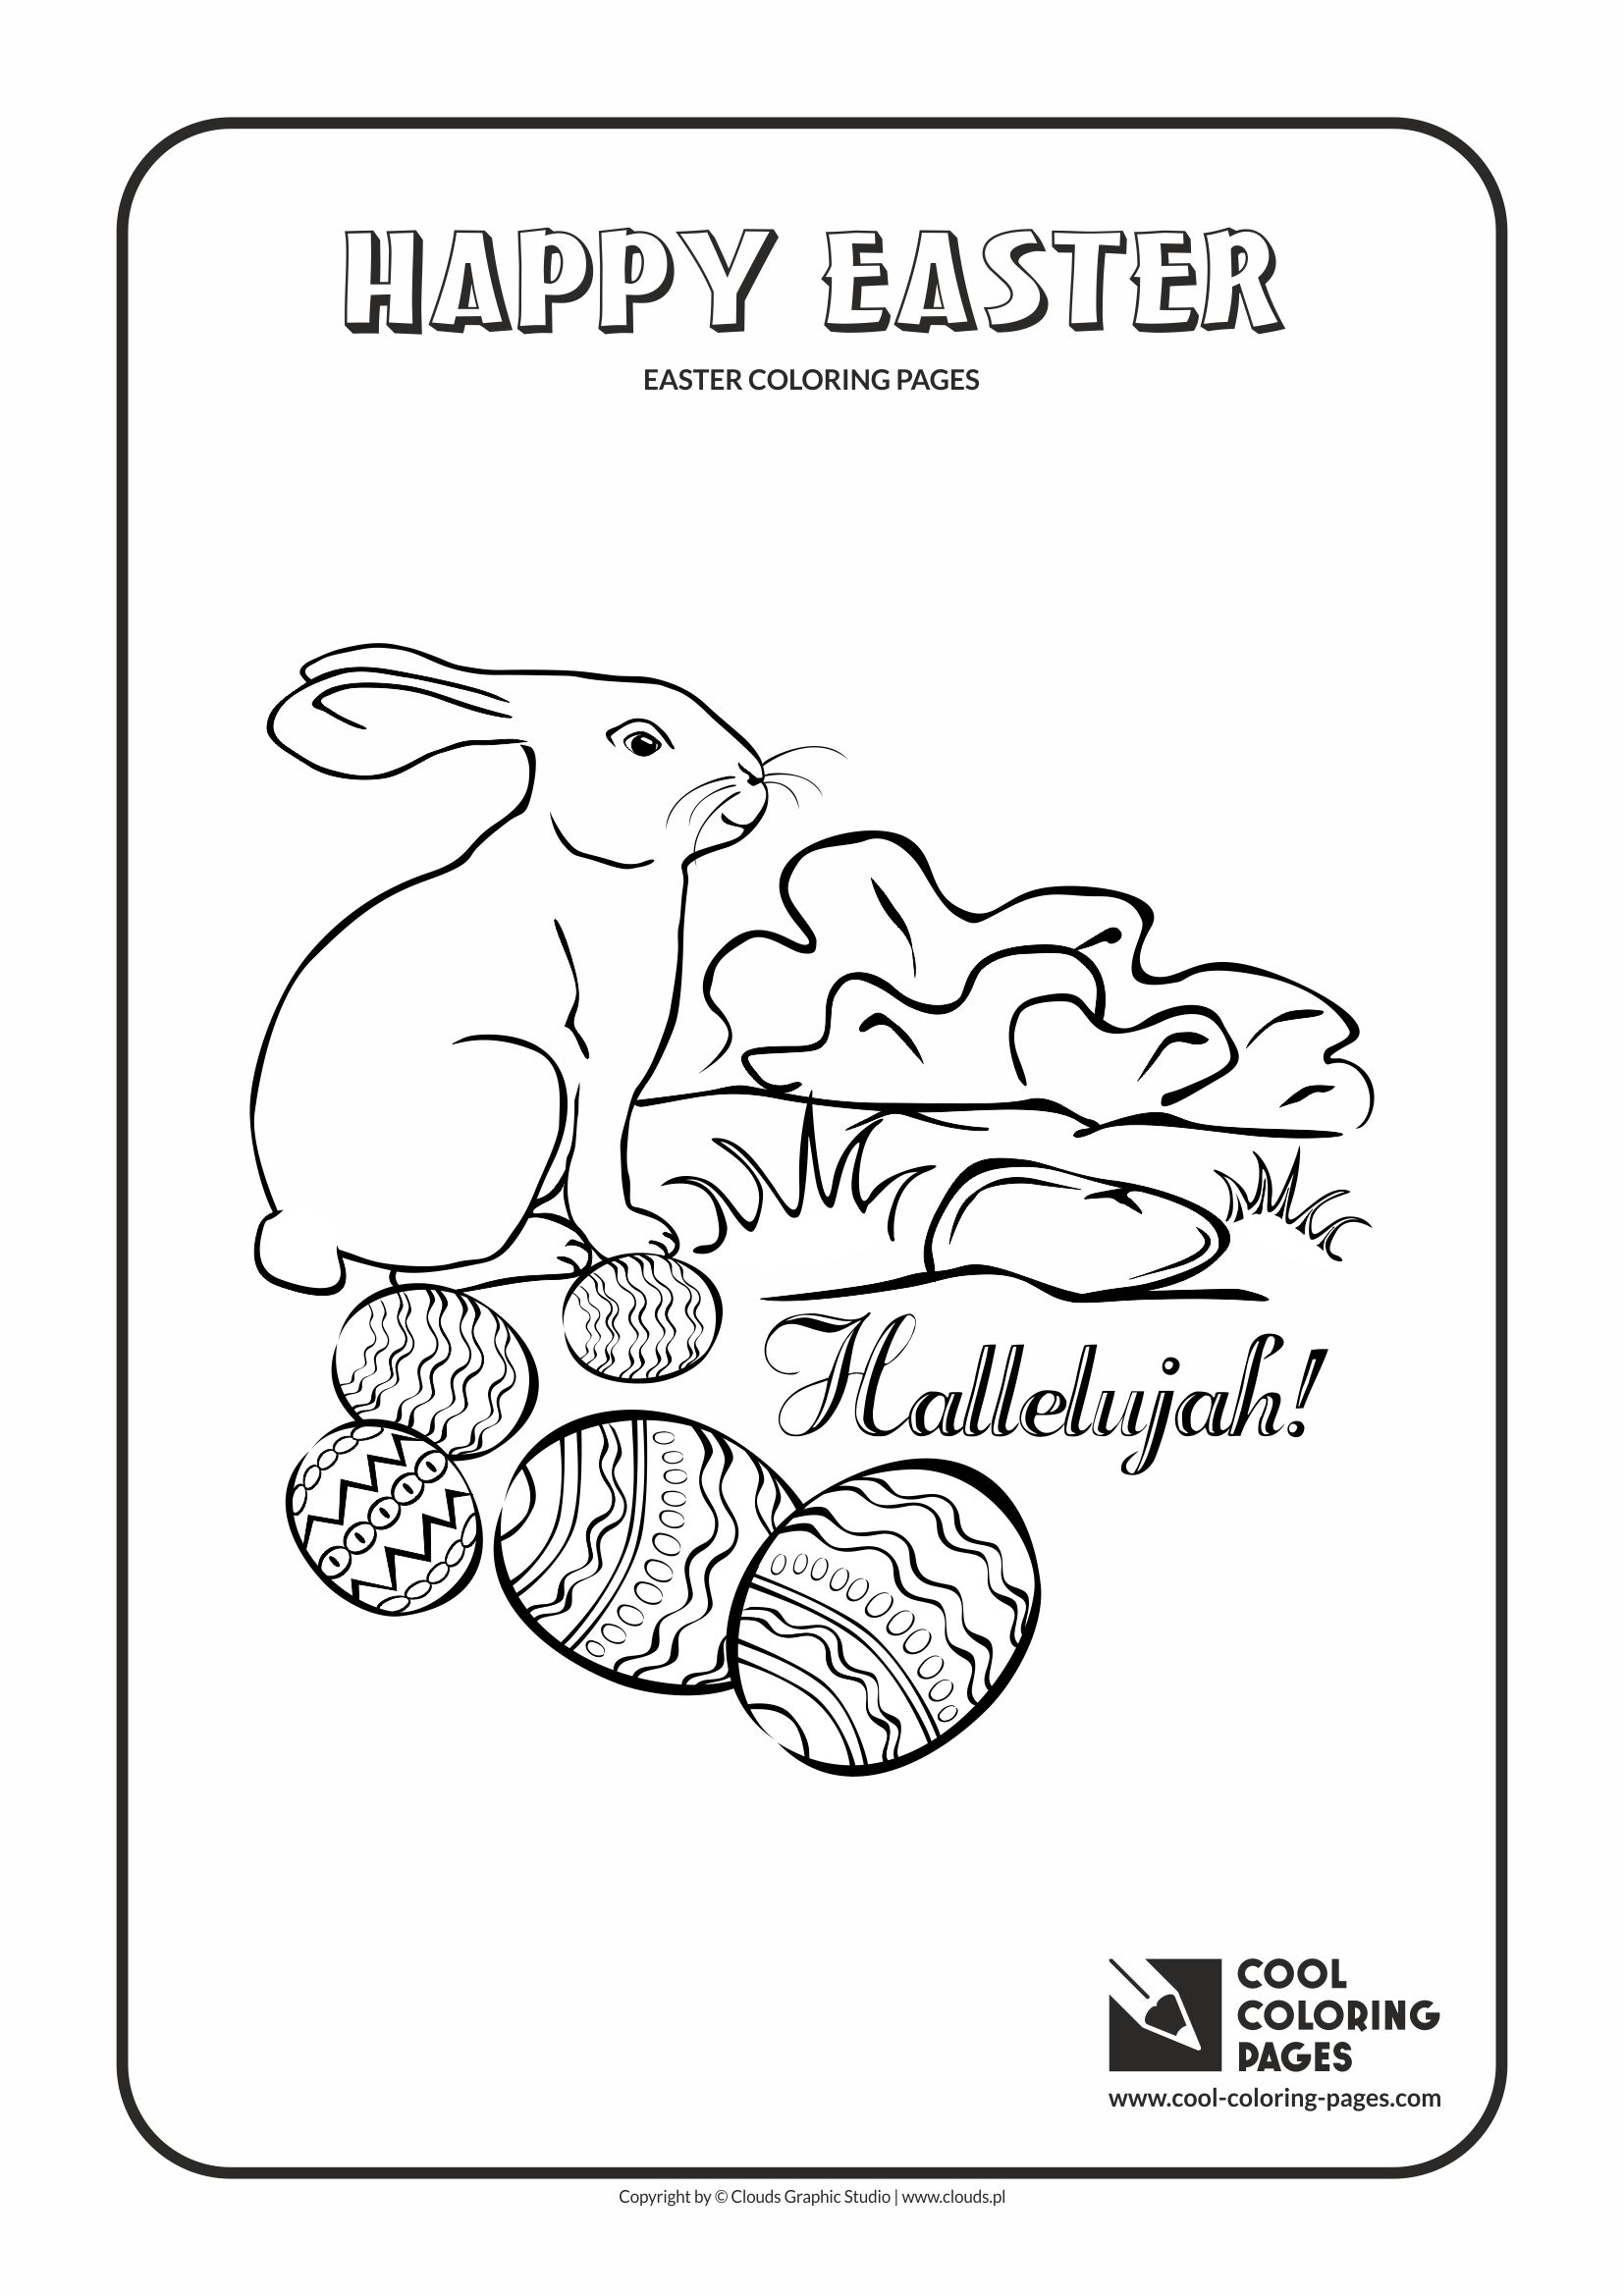 Cool Coloring Pages - Holidays / Easter bunny no 2 / Coloring page with Easter bunny no 2